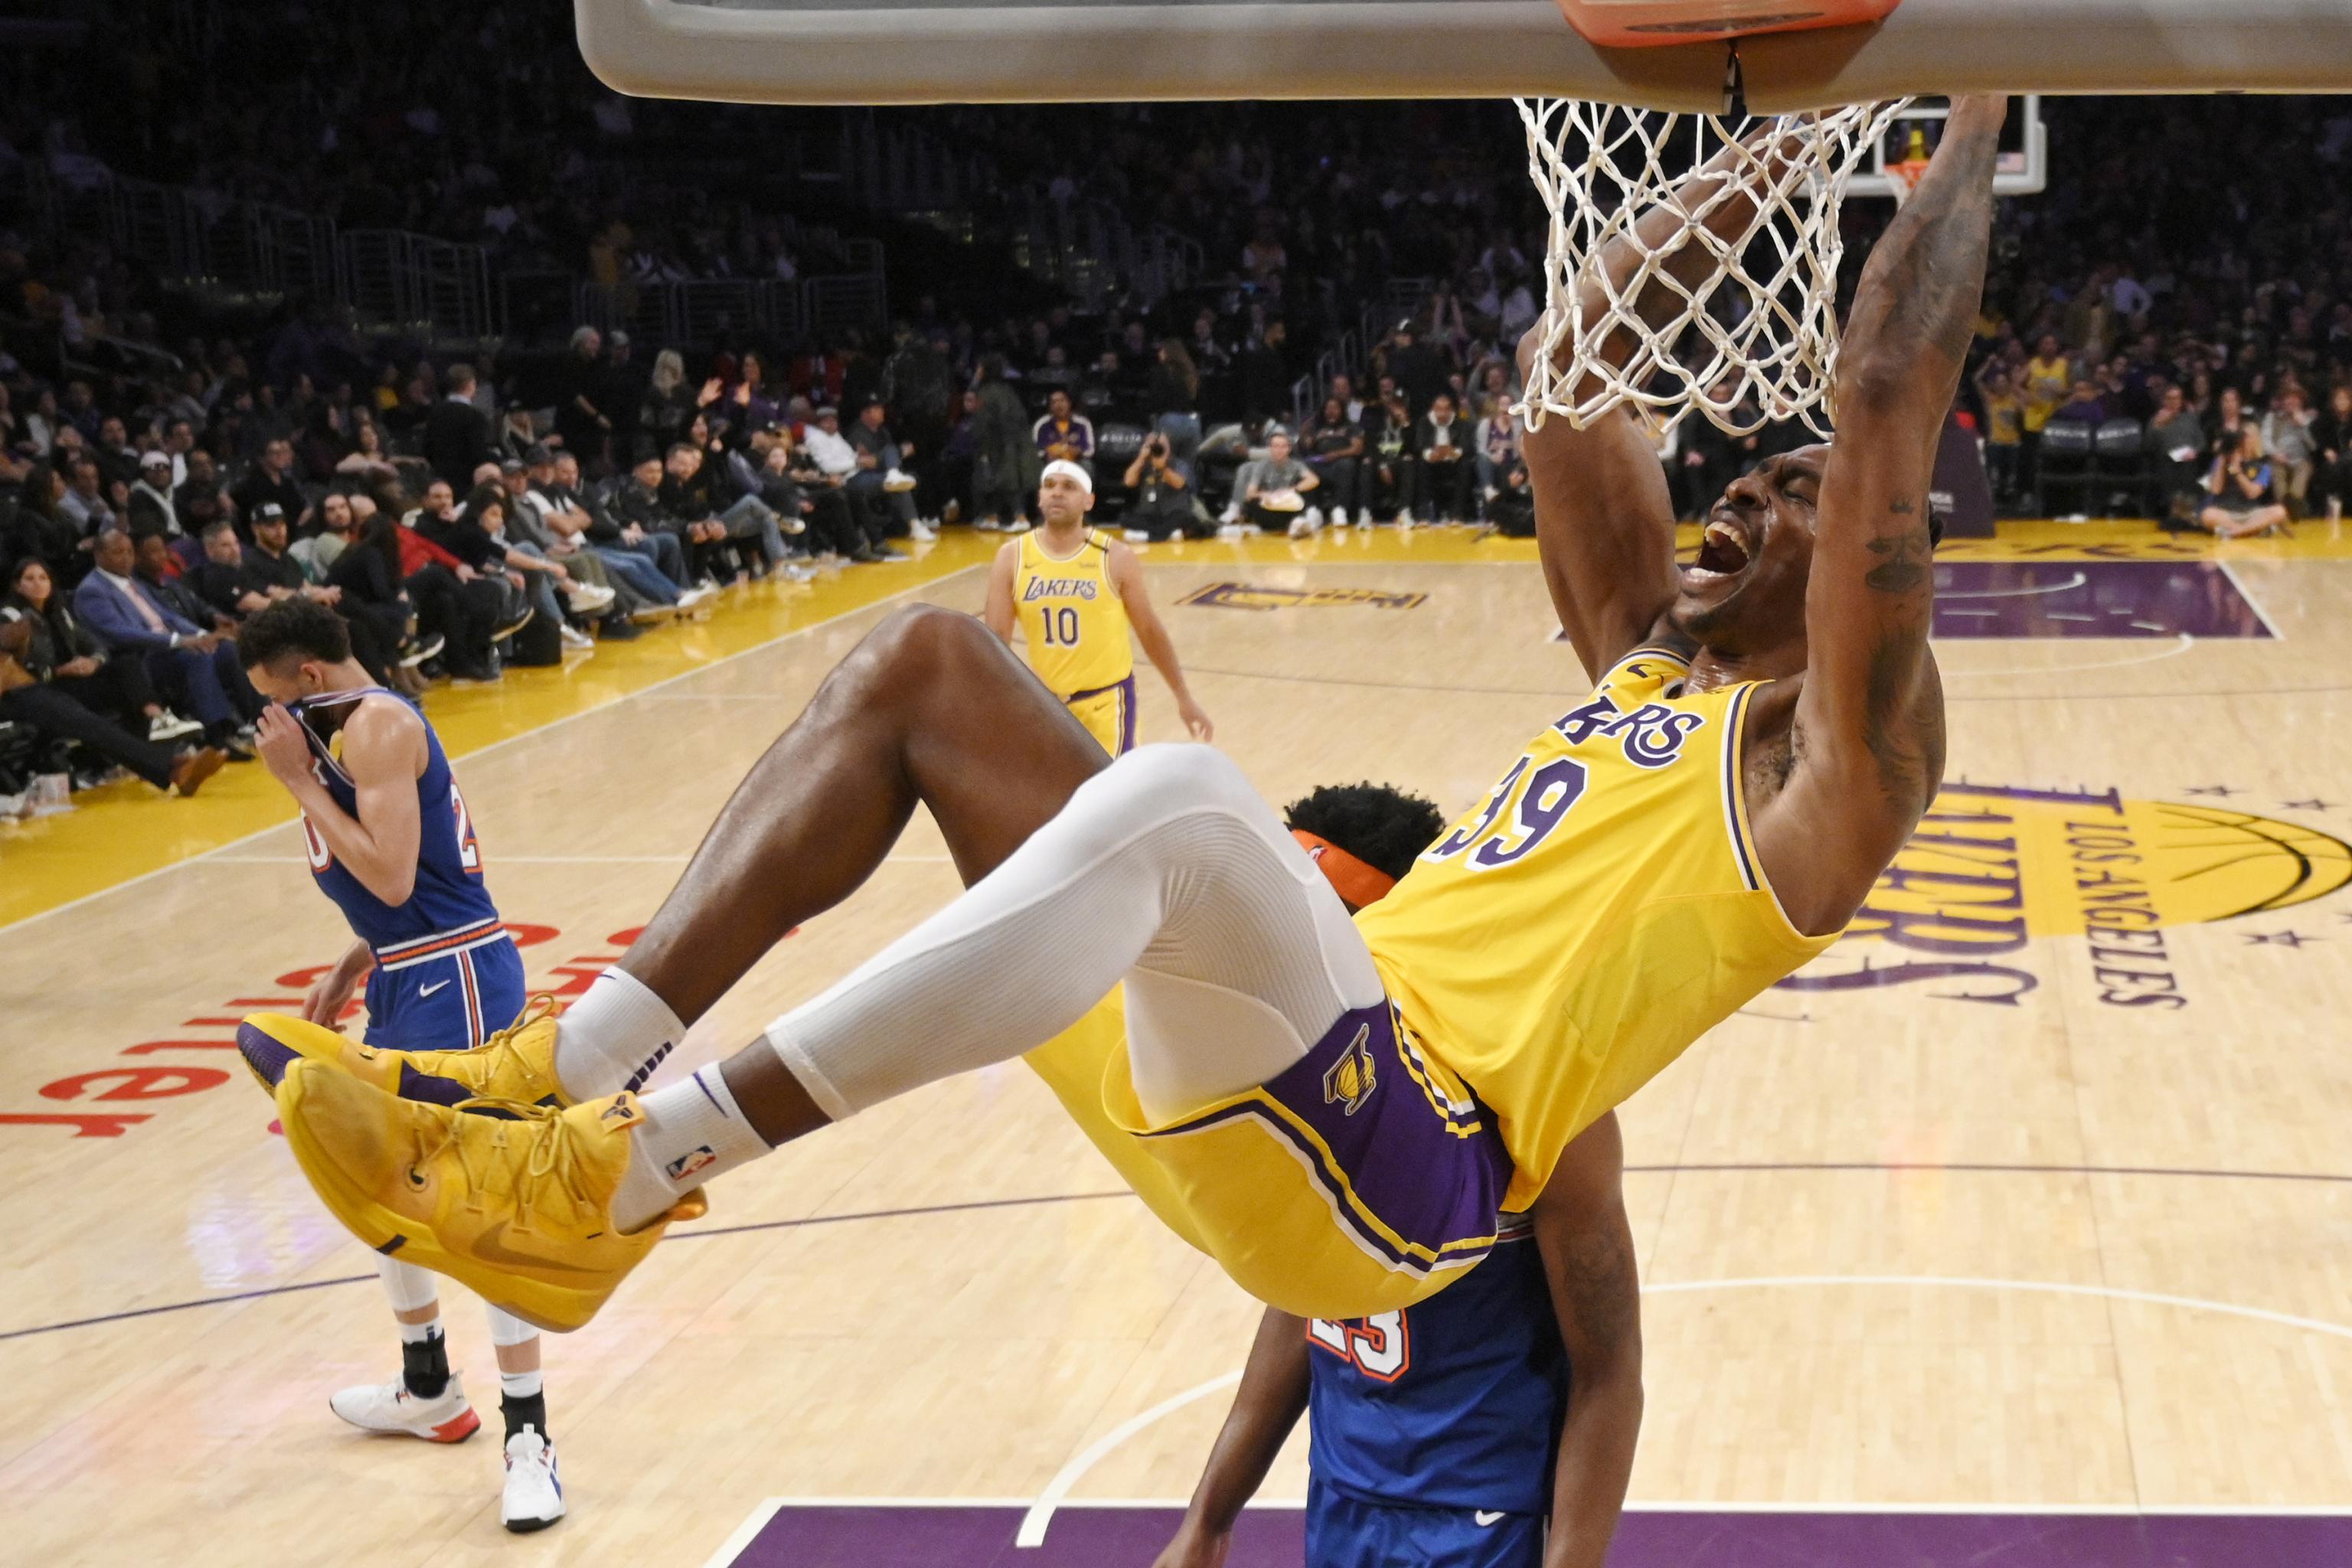 Dwight Howard Wanted 1 Lakers Legend's Help In the Slam Dunk Contest